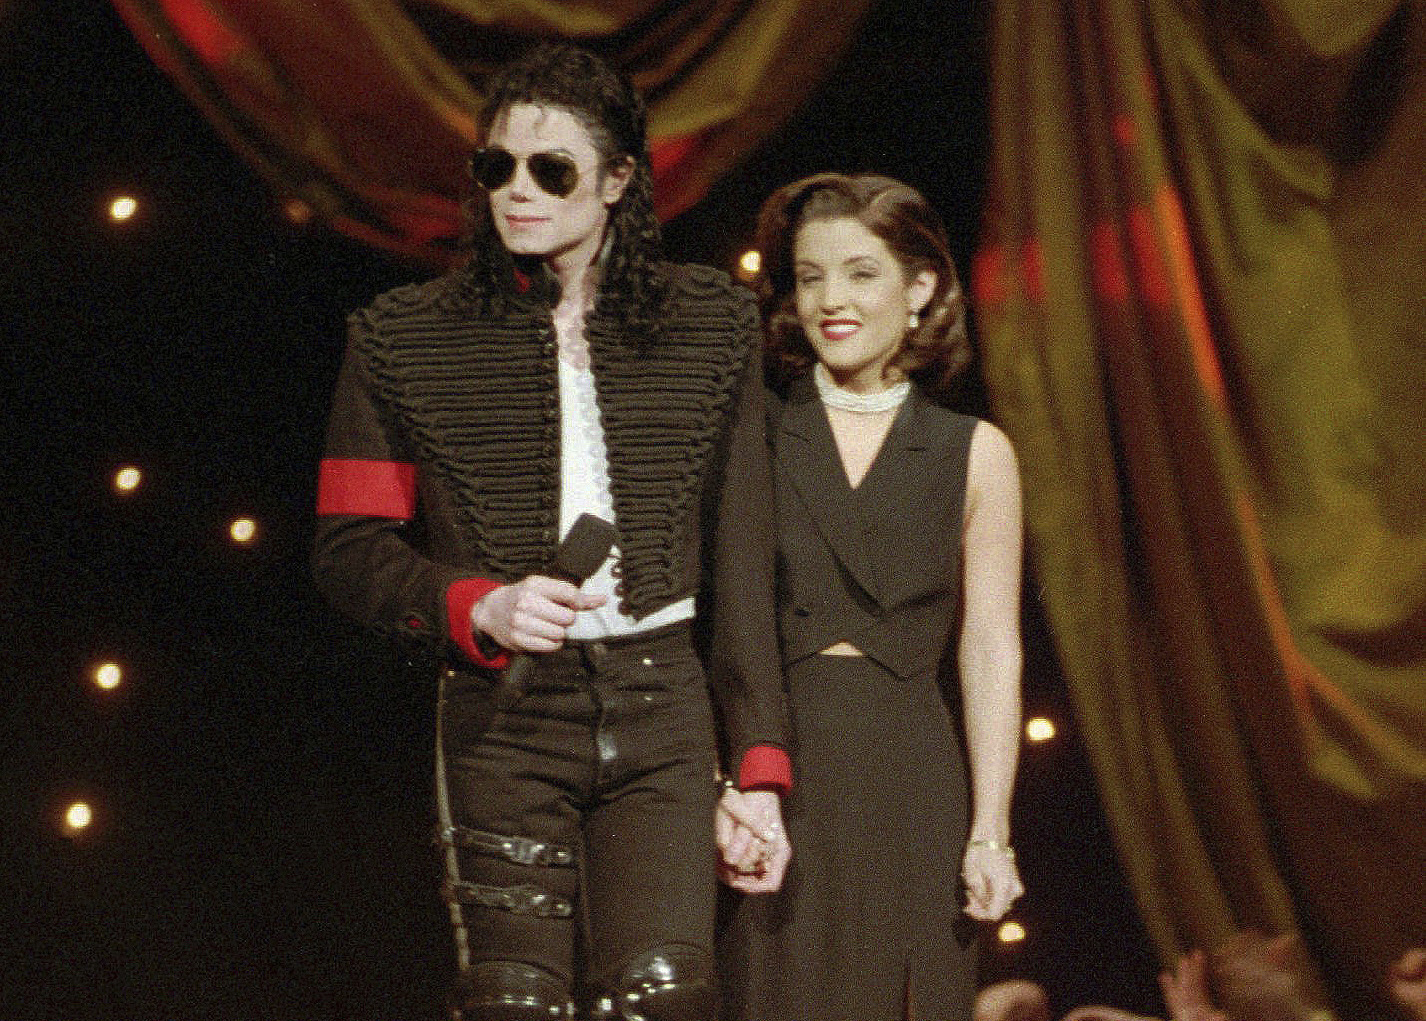 Michael Jackson and Lisa Marie Presley-Jackson acknowledge applause from the audience after coming out onstage to open the 11th annual MTV Video Music Awards at New York's Radio City Music Hall, Sept. 8, 1994